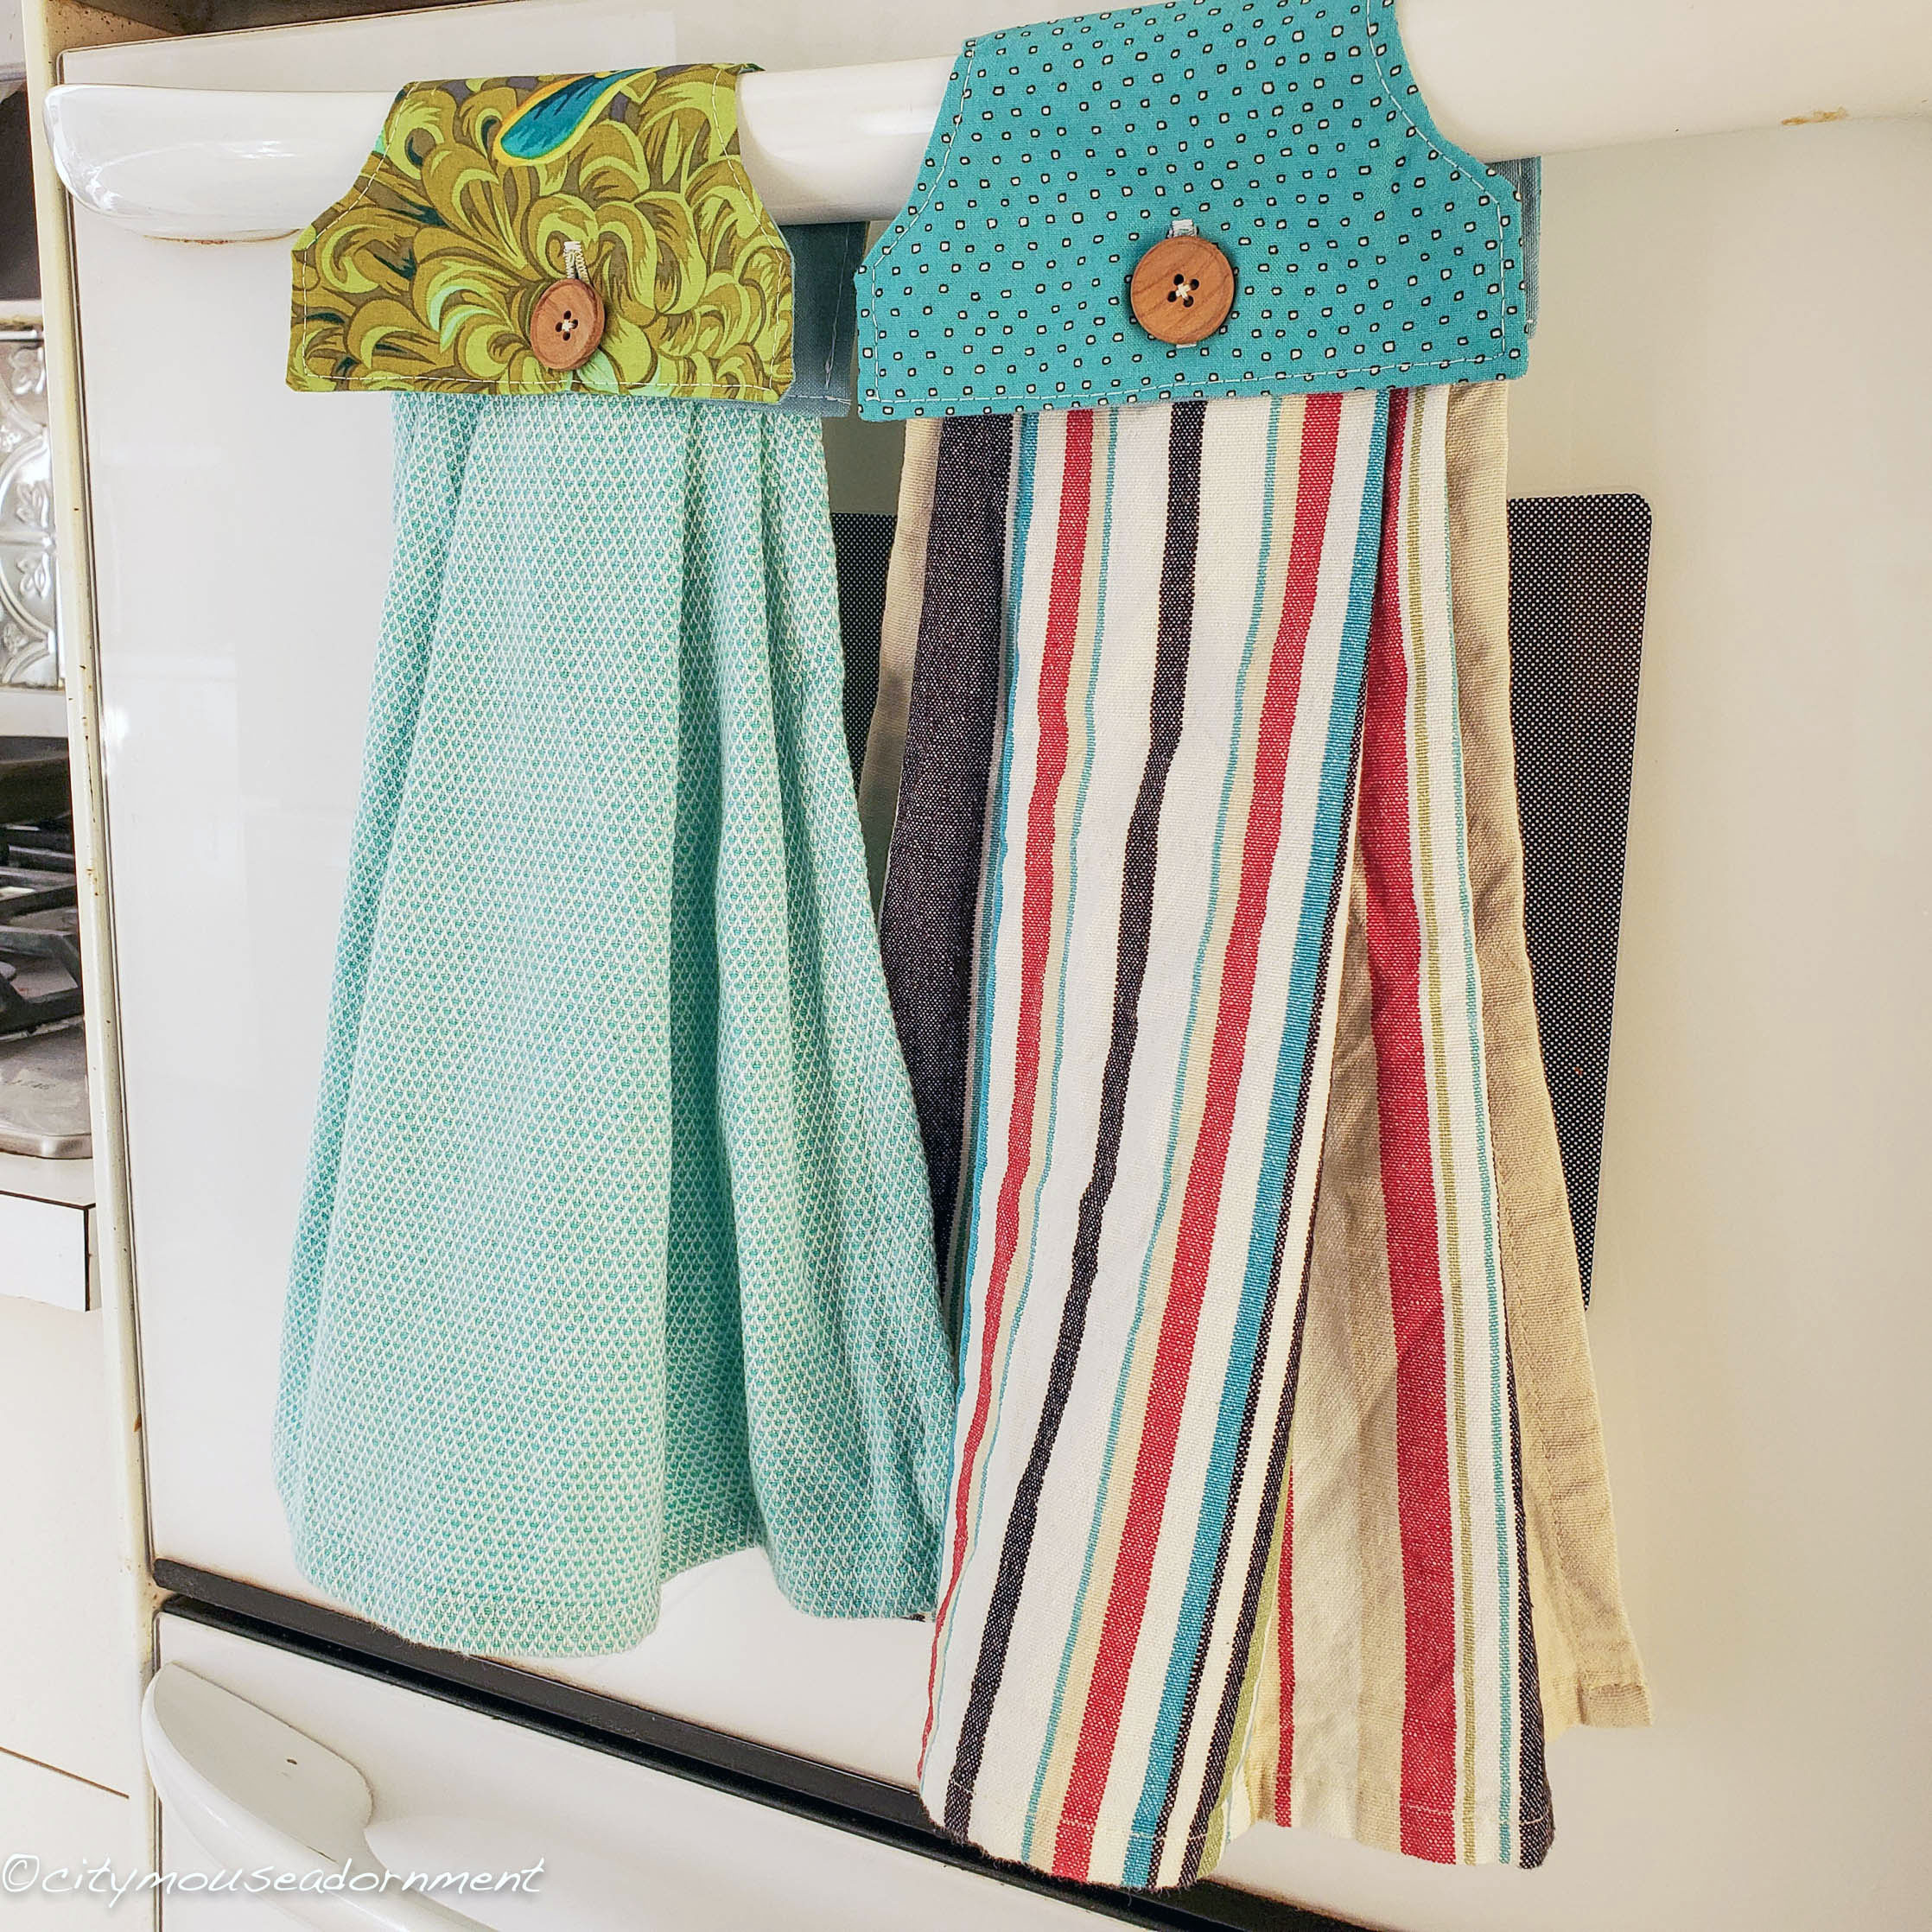 Stove-Oven Towels